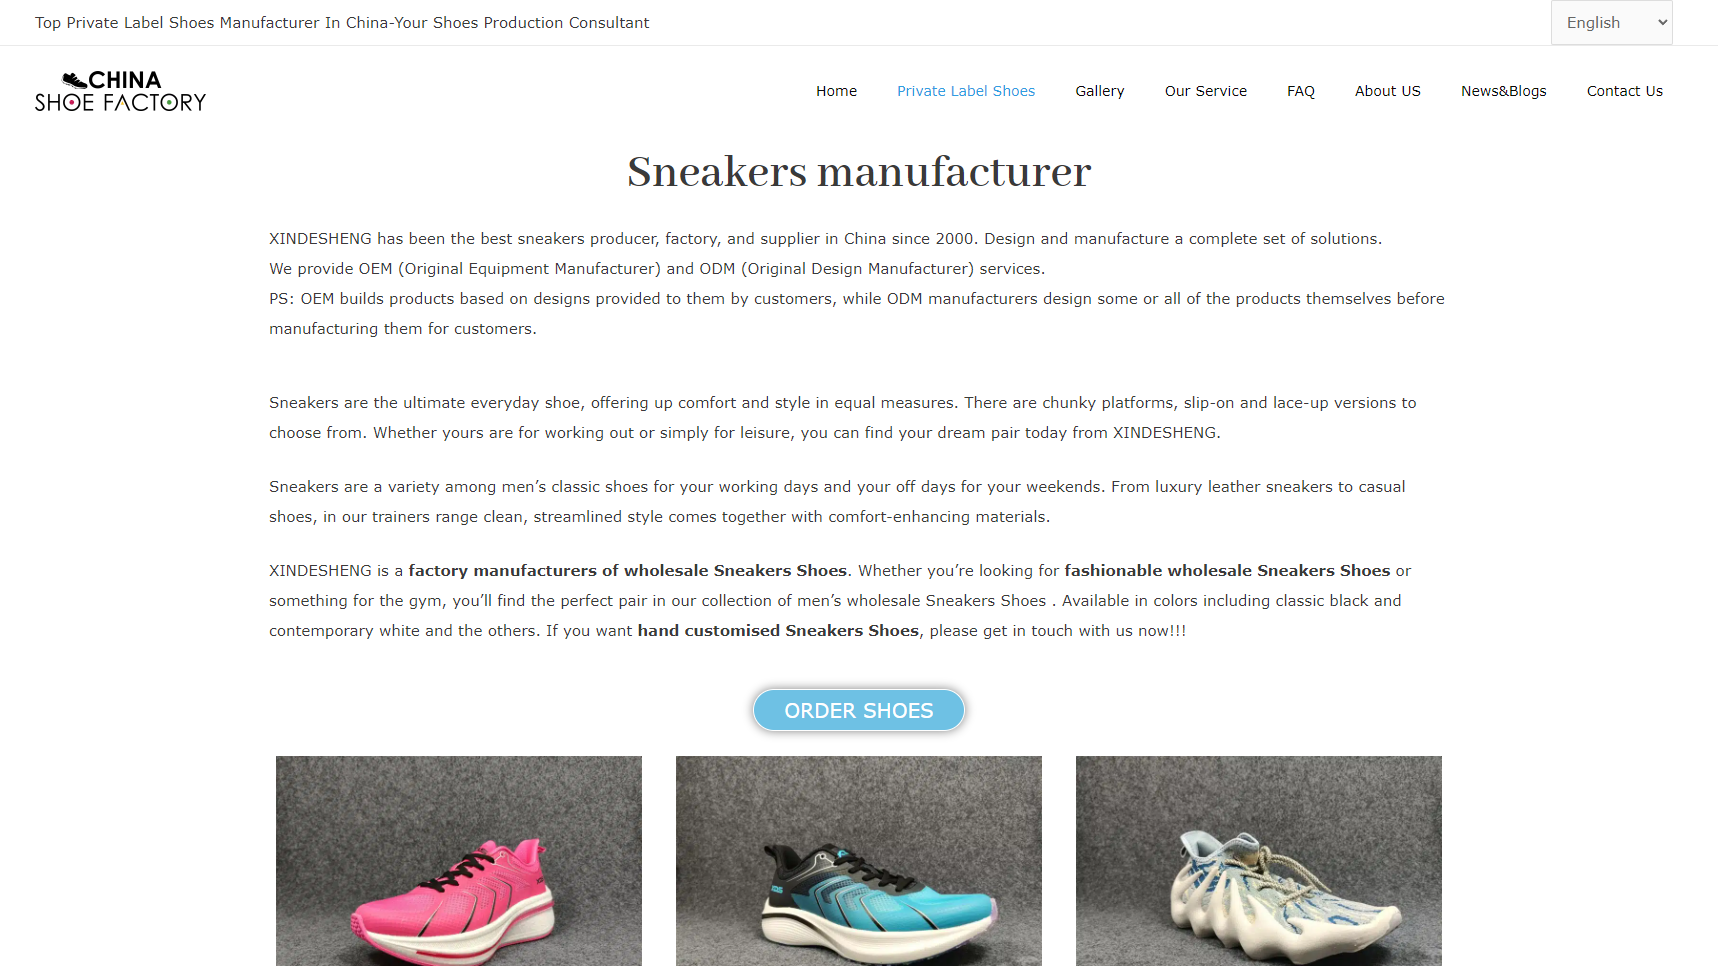 Top Factory Shoes - Sneaker Manufacturer